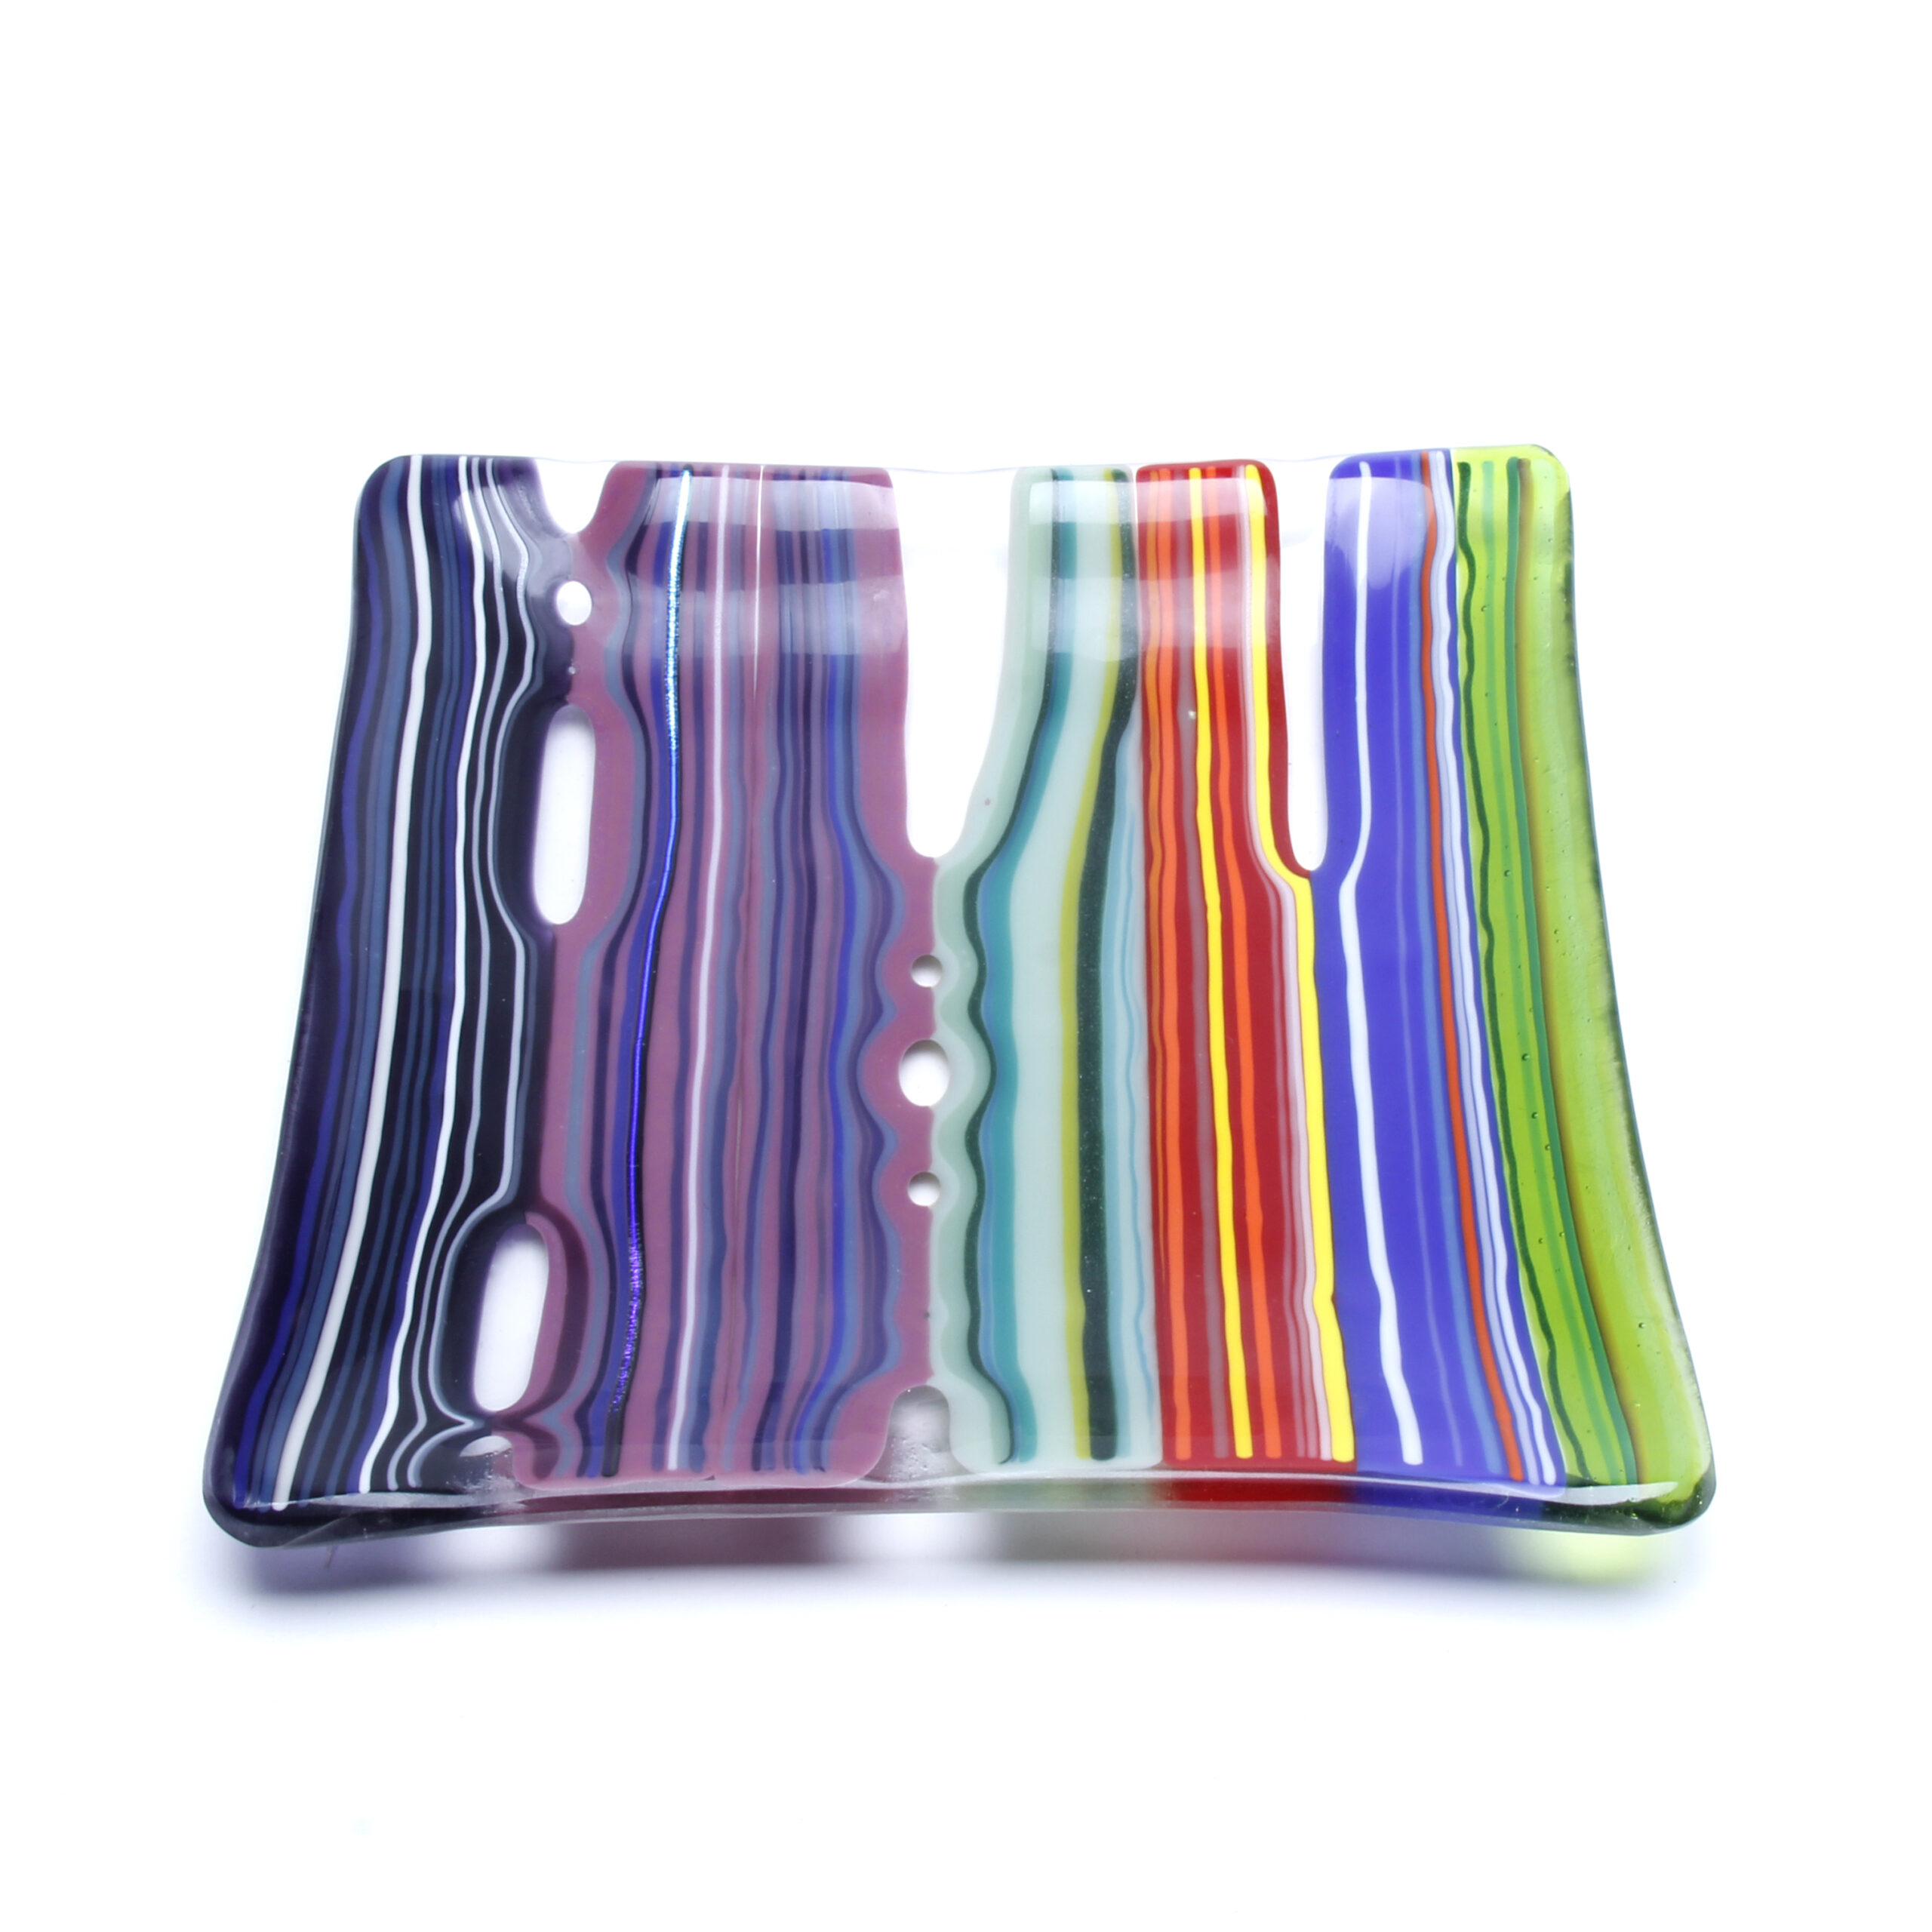 Trio Design Glassware: 7 inch Candy Dish (Each sold separately) Product Image 2 of 3